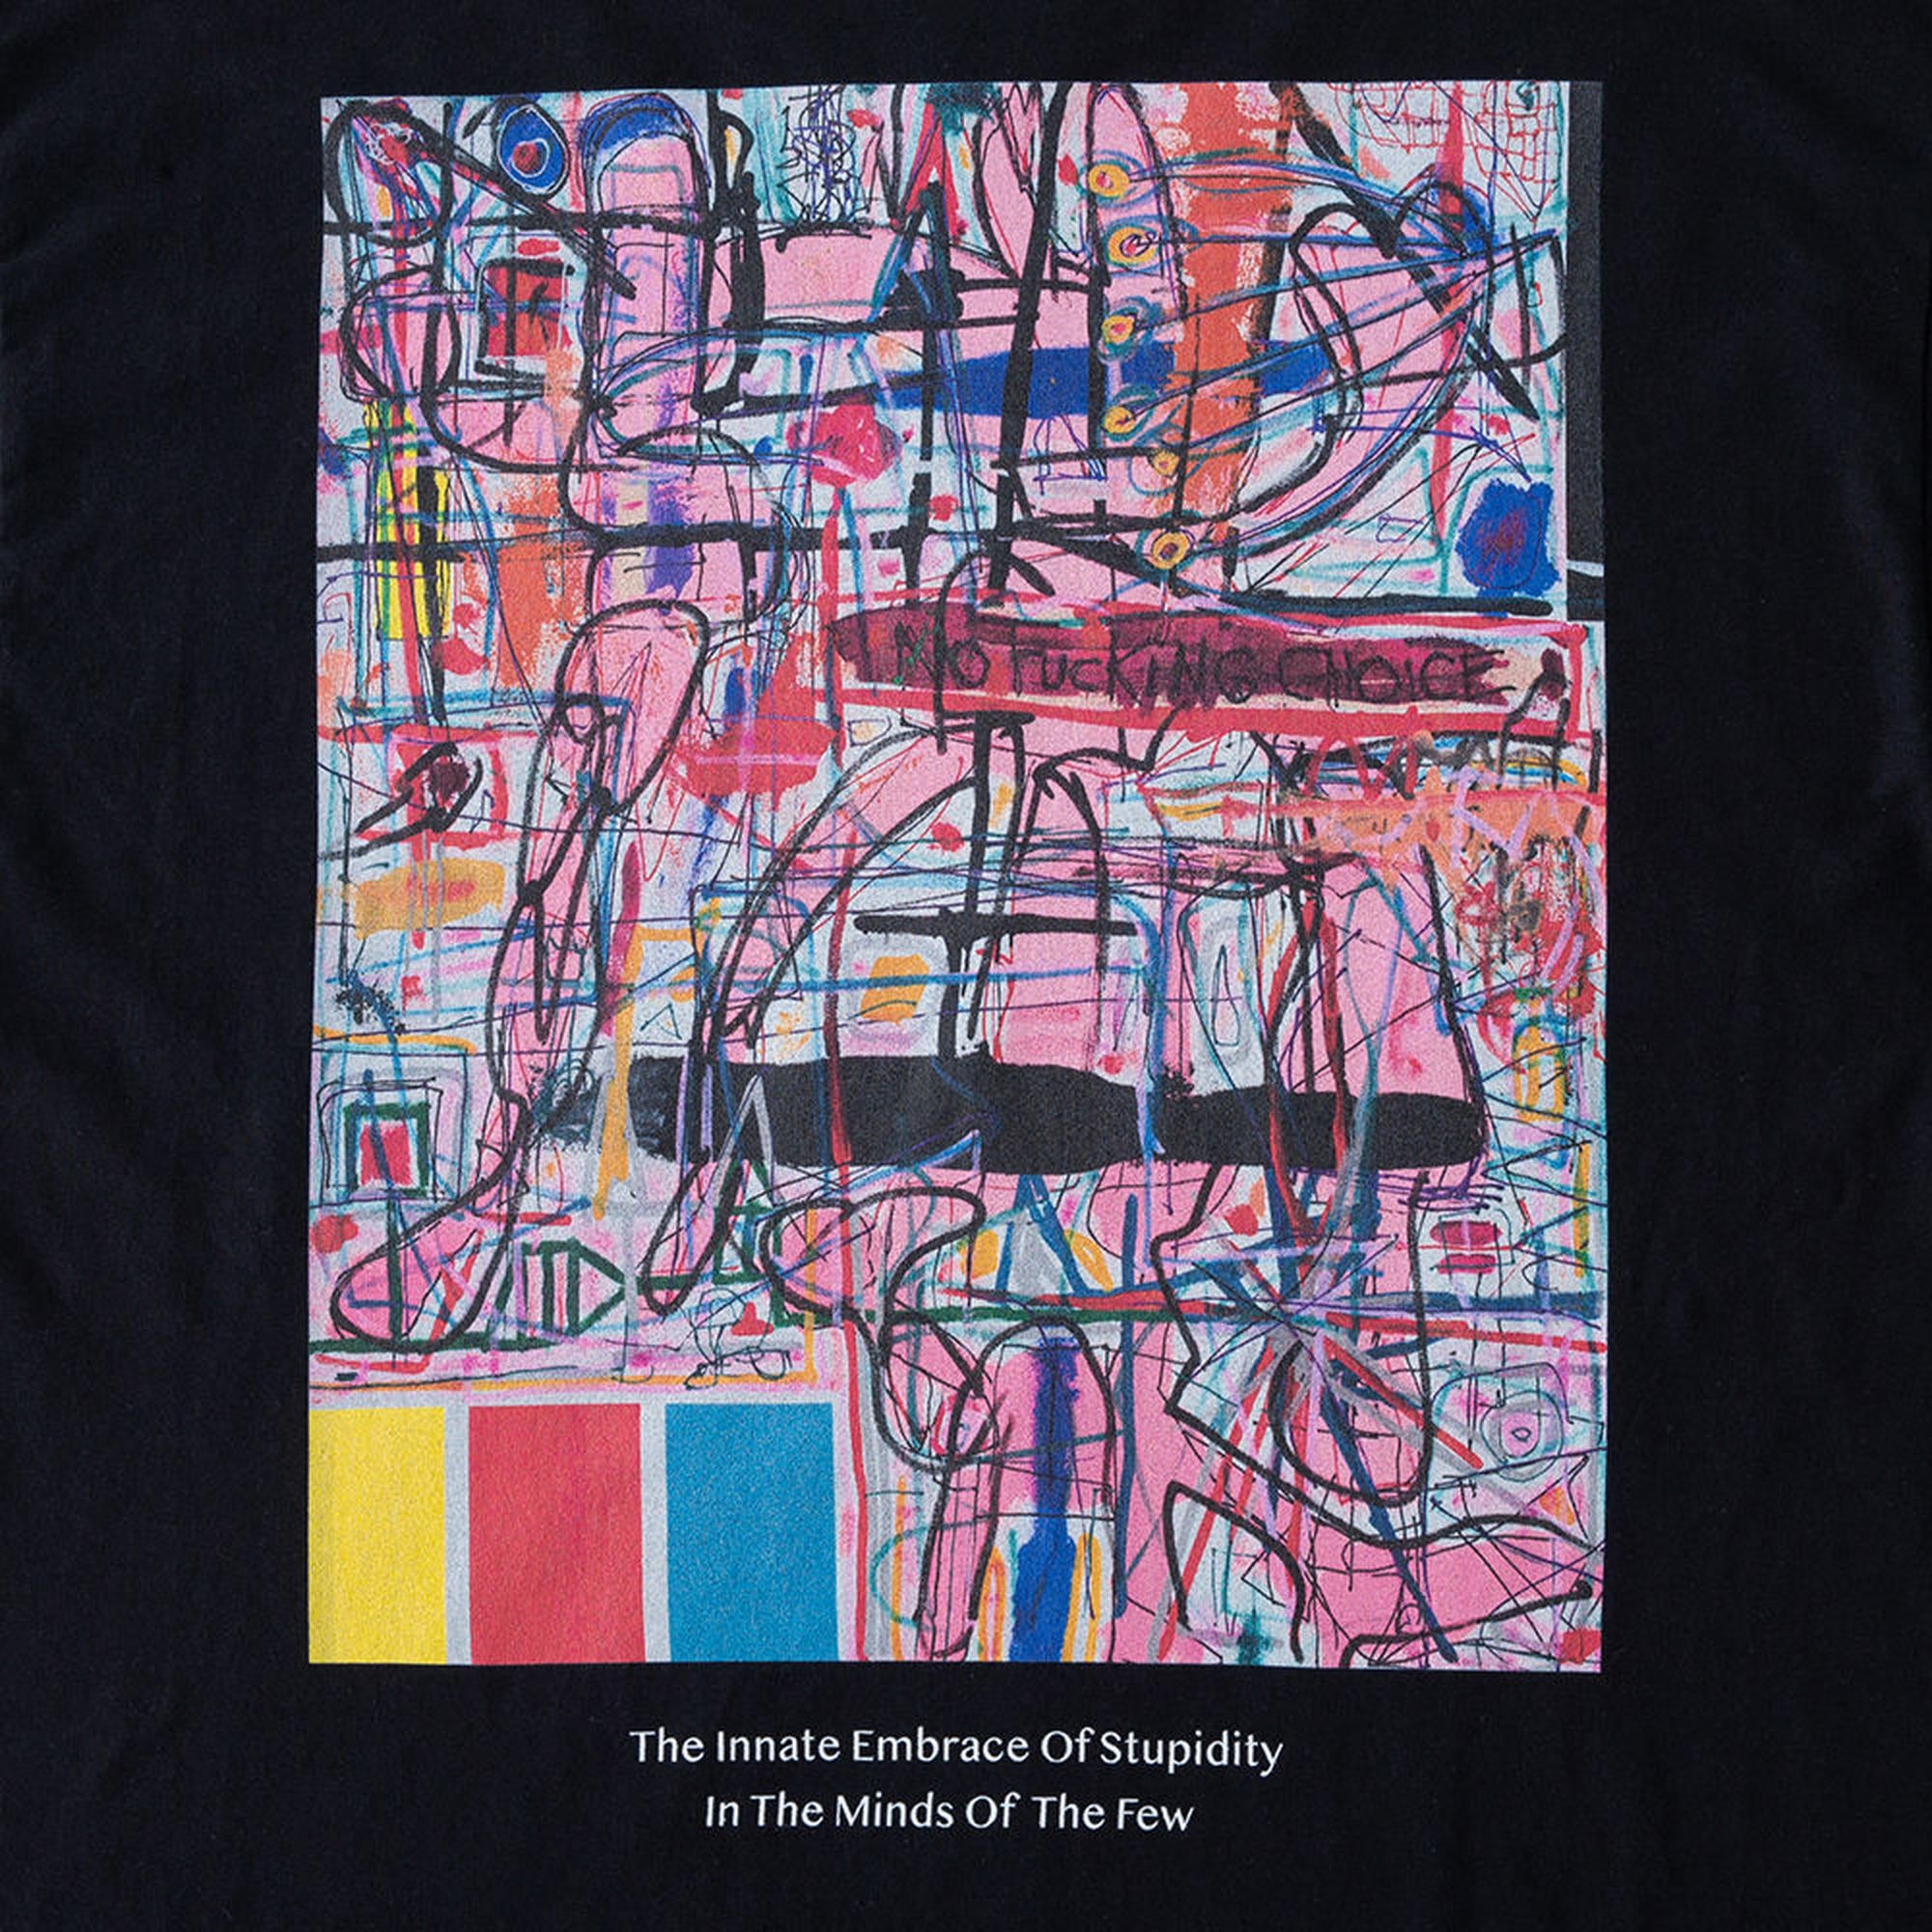 NICK WAPLINGTON - 'The Innate Embrace Of Stupidity In The Minds Of The Few' S/S TEE